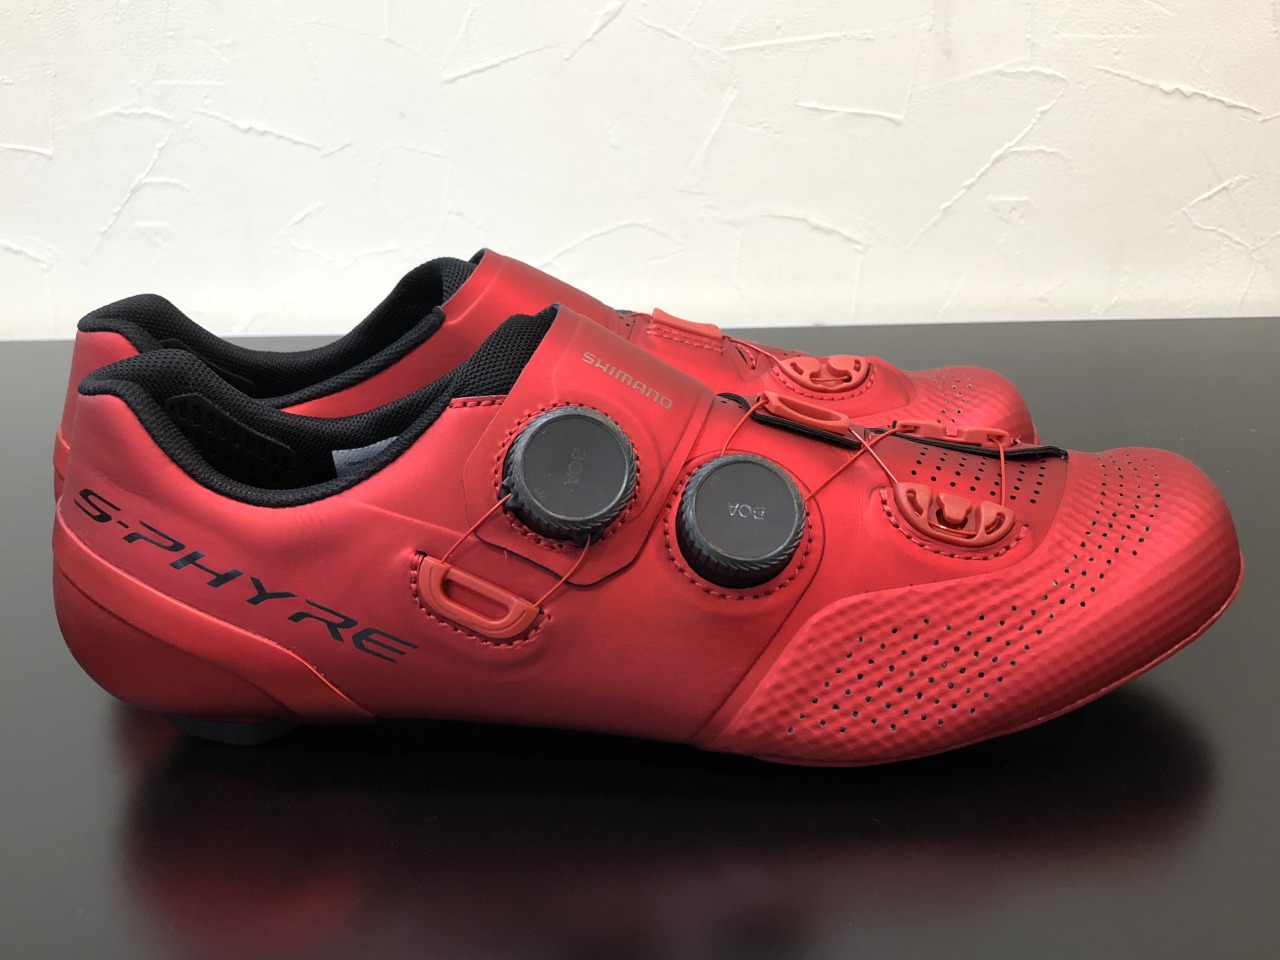 S-PHYRE RC902 限定カラーRED ROUGE入荷しました！ - Climb cycle sports